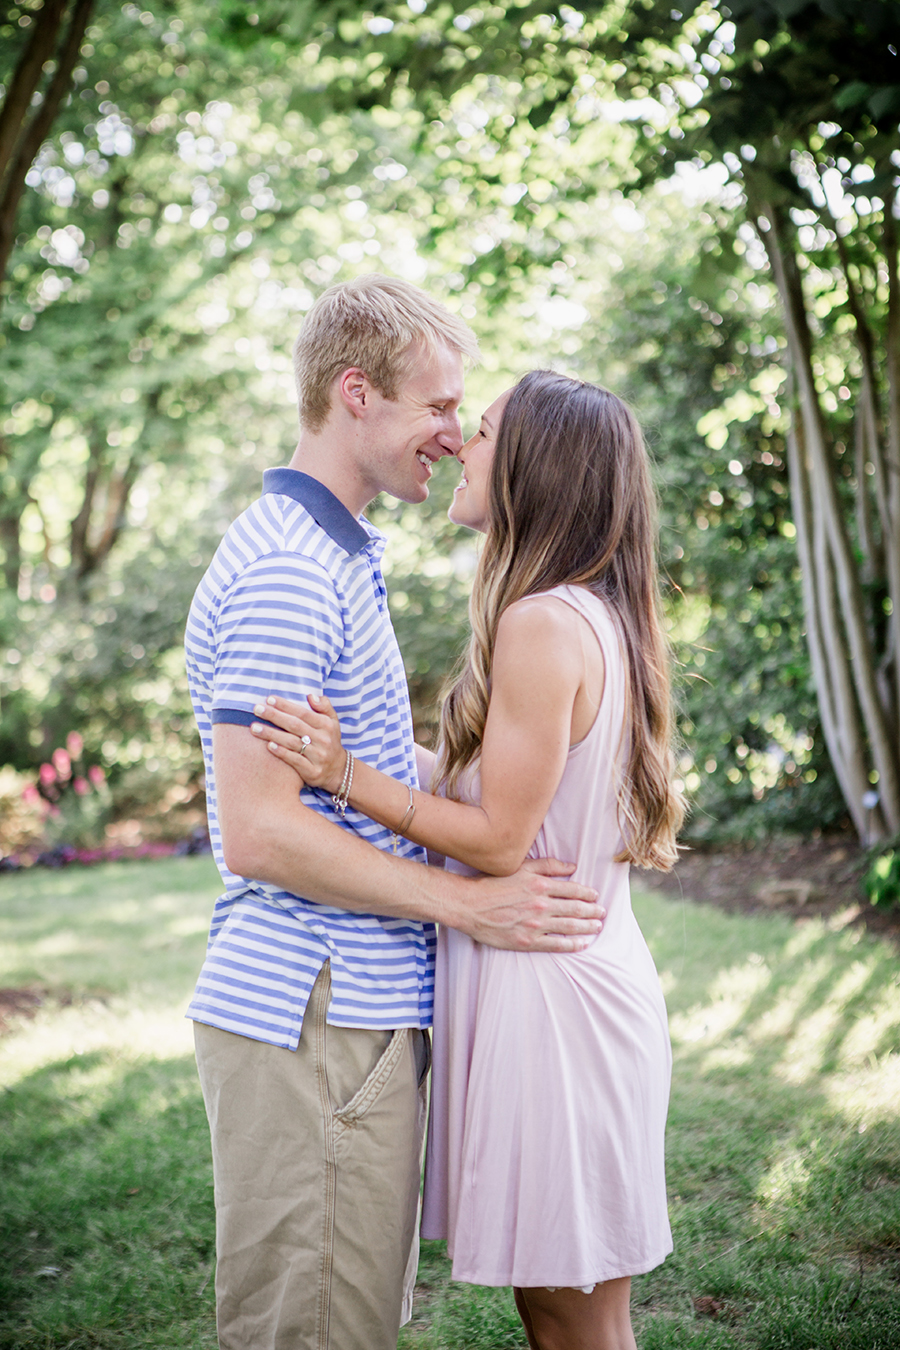 Noses together engagement photo by Knoxville Wedding Photographer, Amanda May Photos.